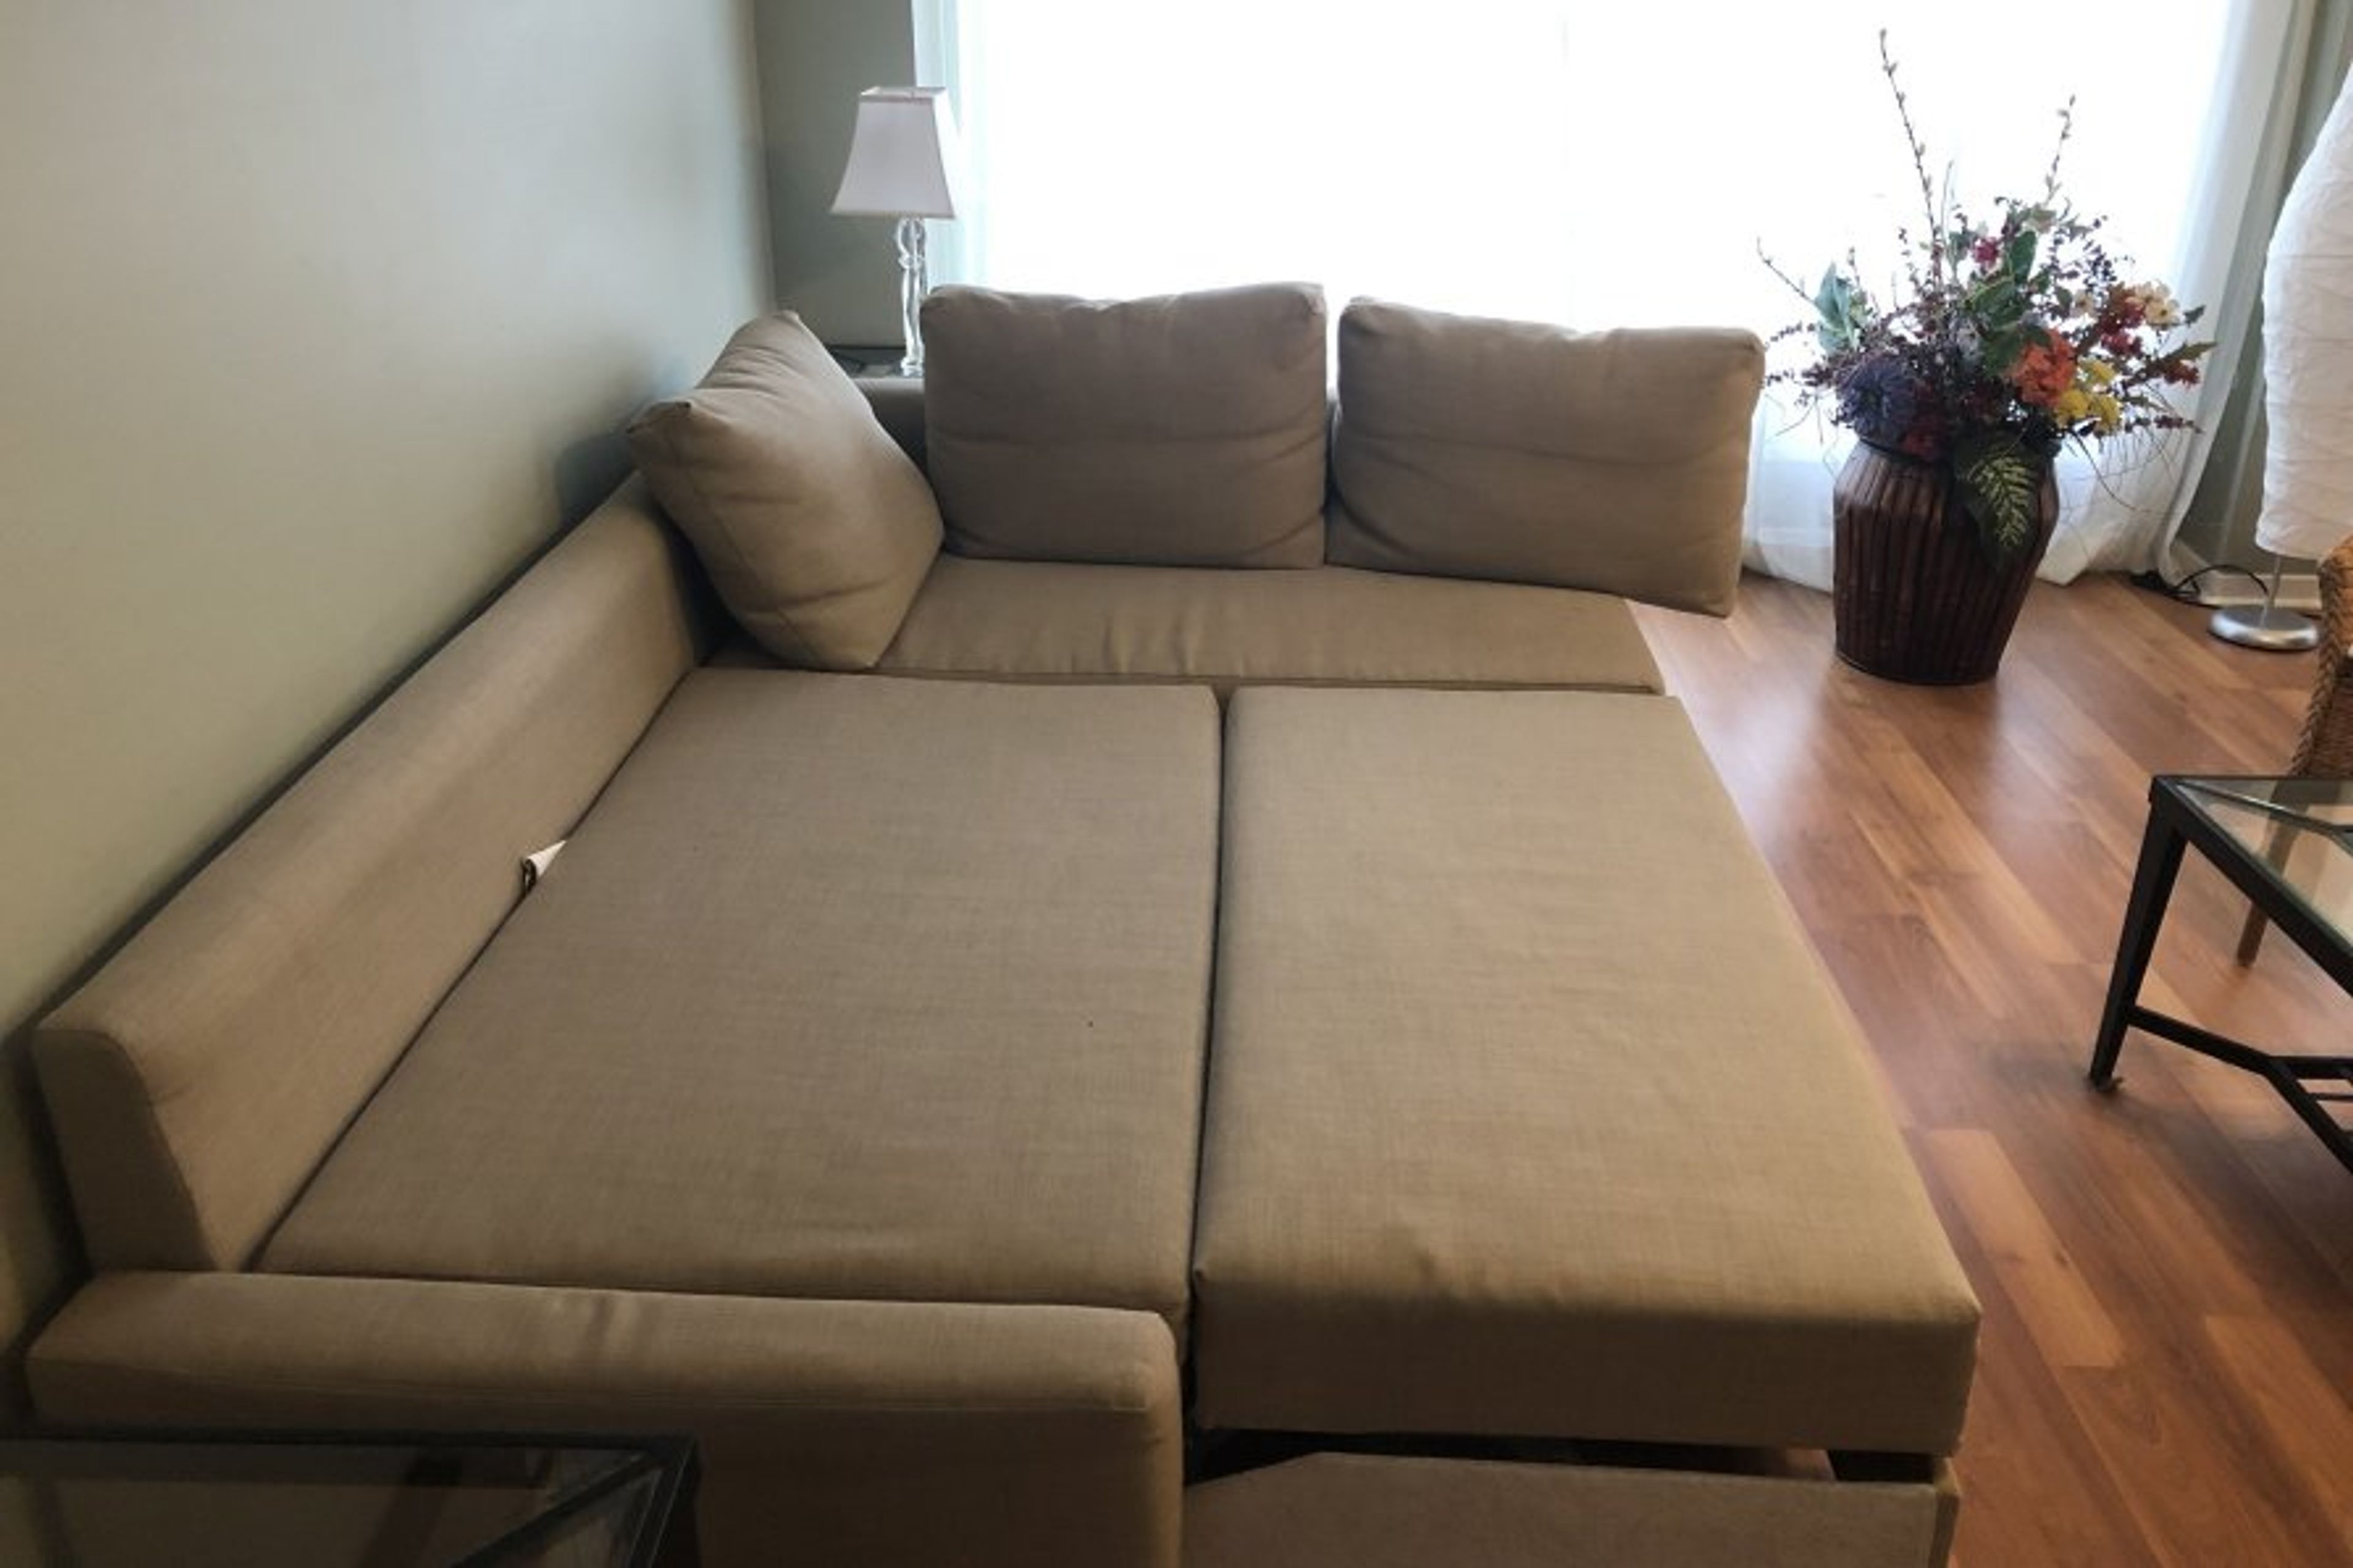 Living Room - Queen size sofa bed for two people